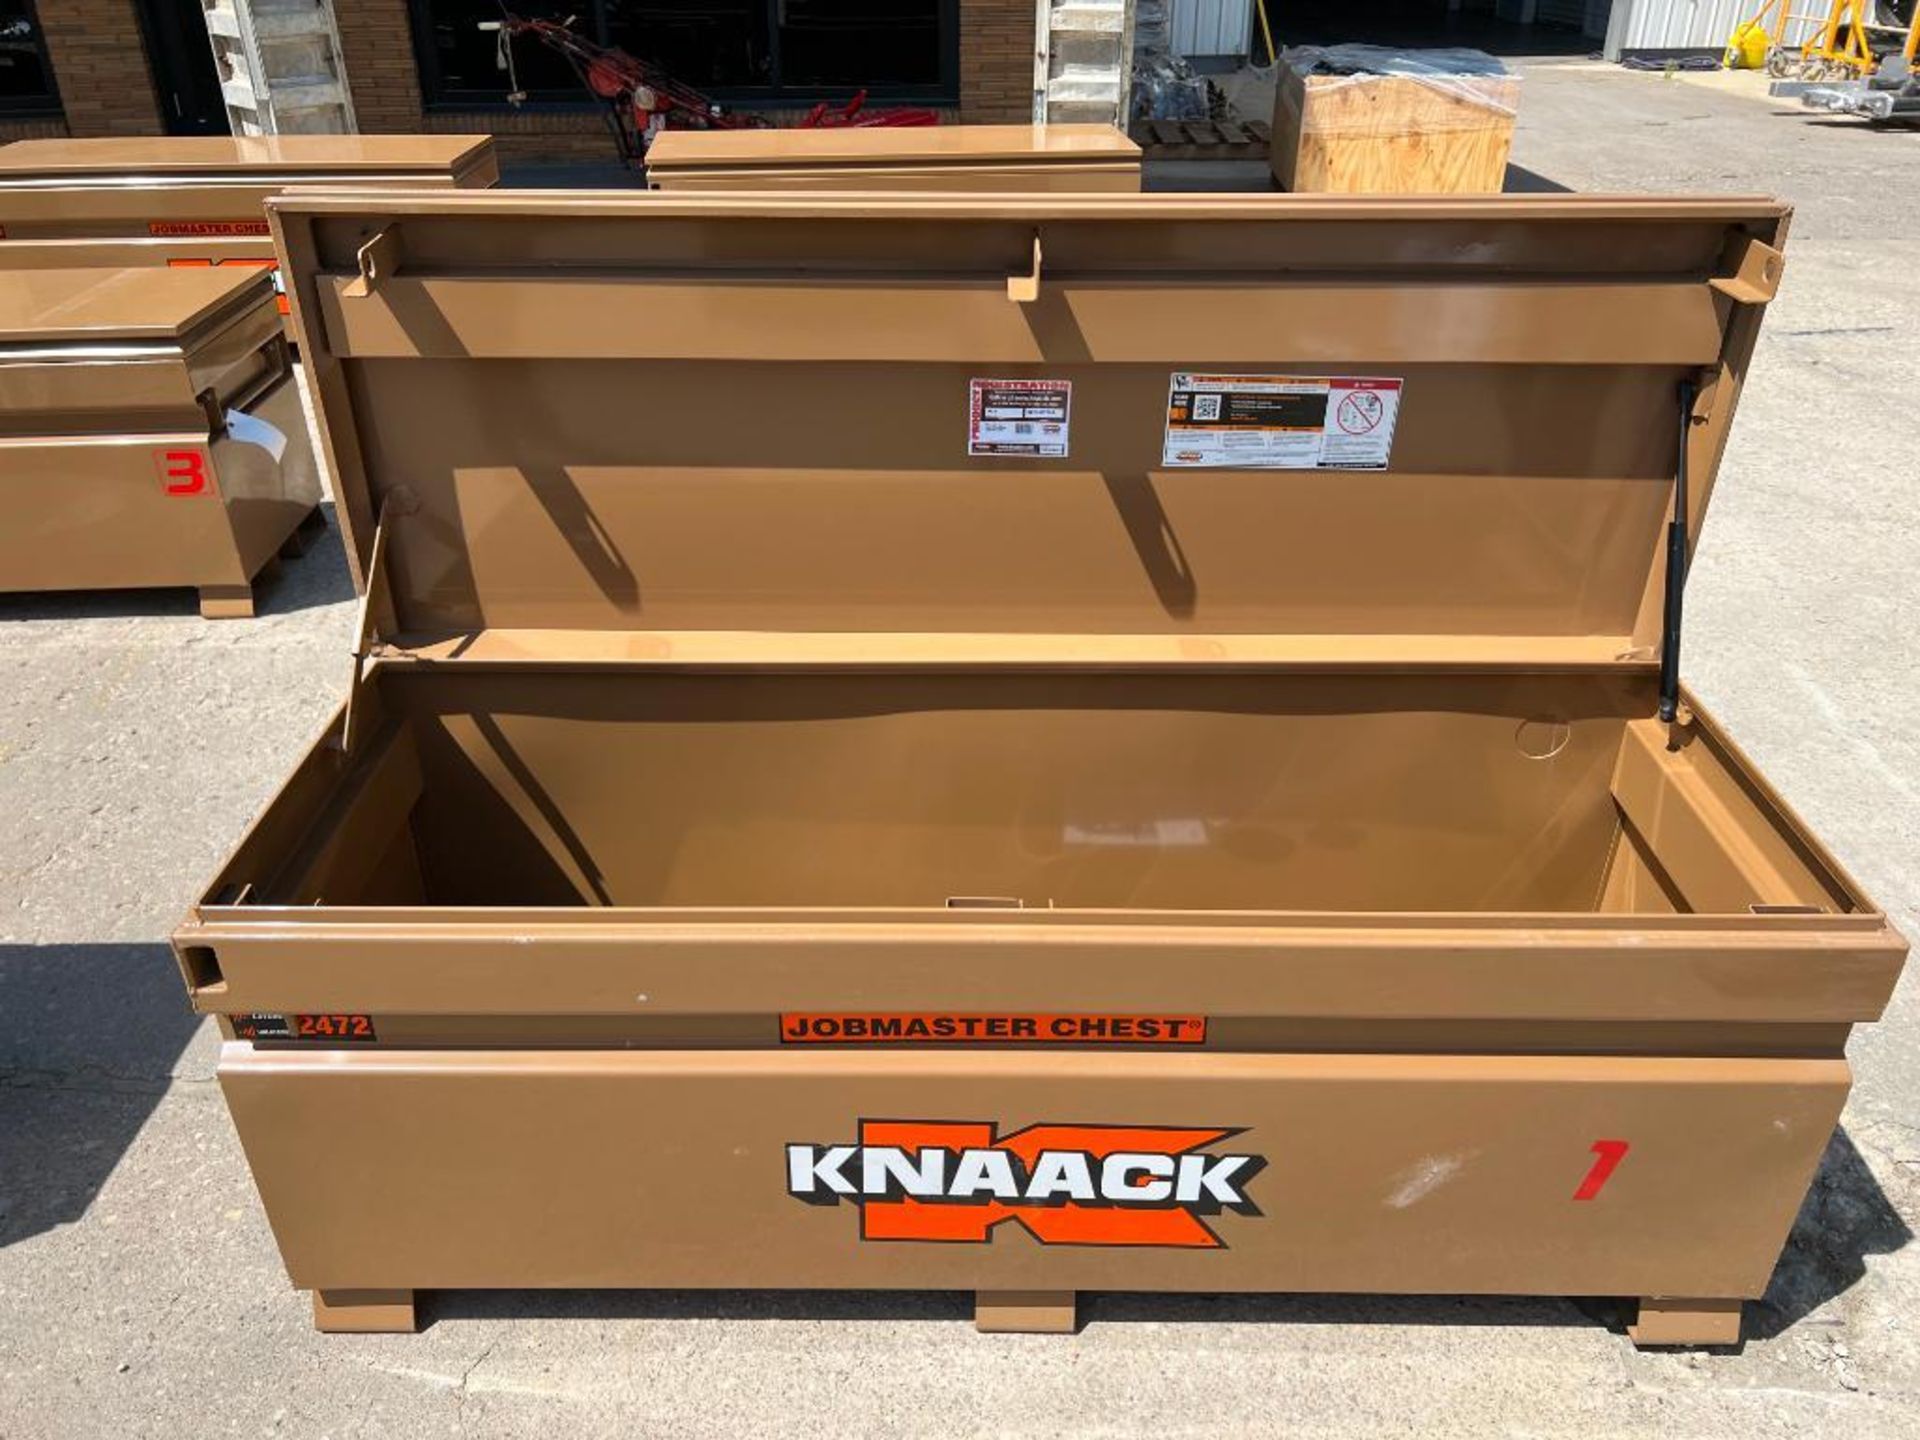 Knaack Jobmaster Chest, Model #2472, Serial #2211017524. Located in Mt. Pleasant, IA - Image 3 of 3